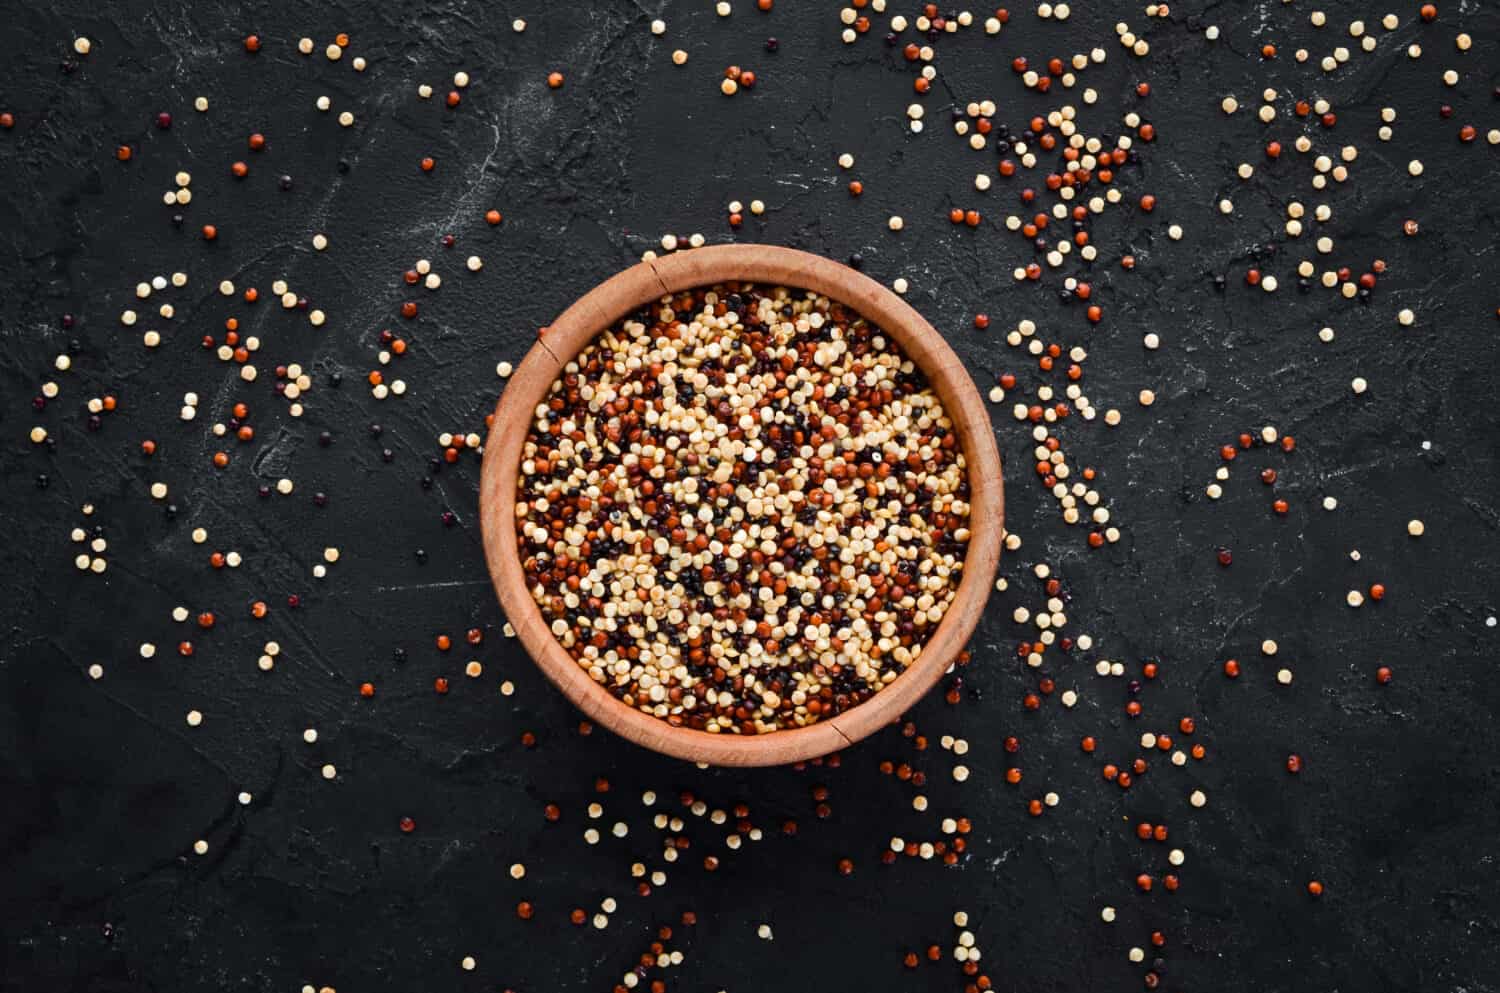 Set of quinoa Red, white and brown quinoa. On a black background. Top view. Free copy space.